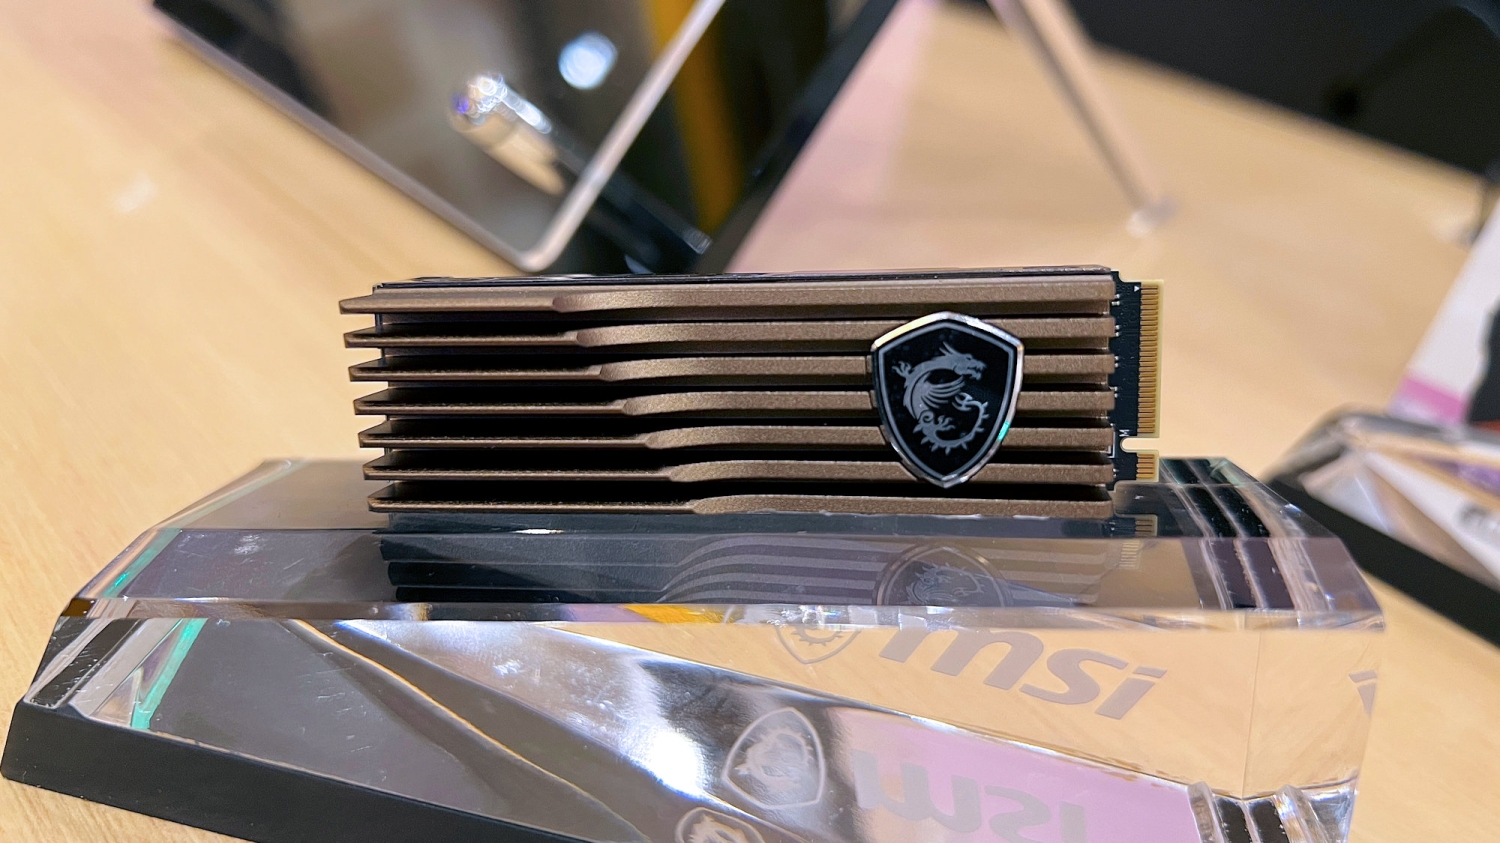 MSI teases a PCIe 5.0 SSD that's jaw-droppingly fast